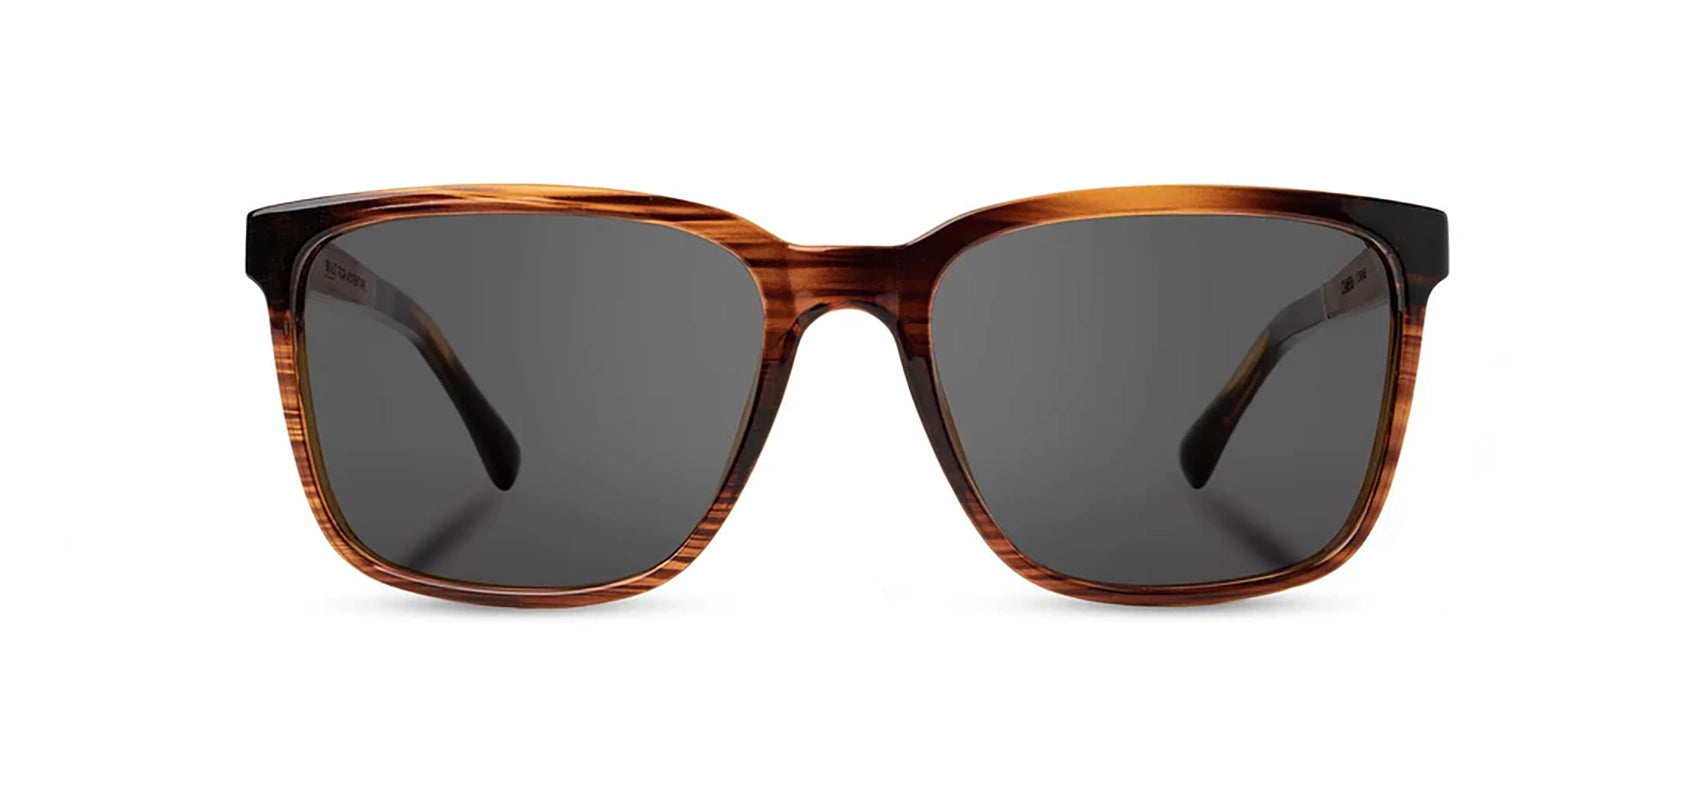 Camp Crag Sunglasses in Tortoise with walnut frames, grey Polarized lenses, front  view